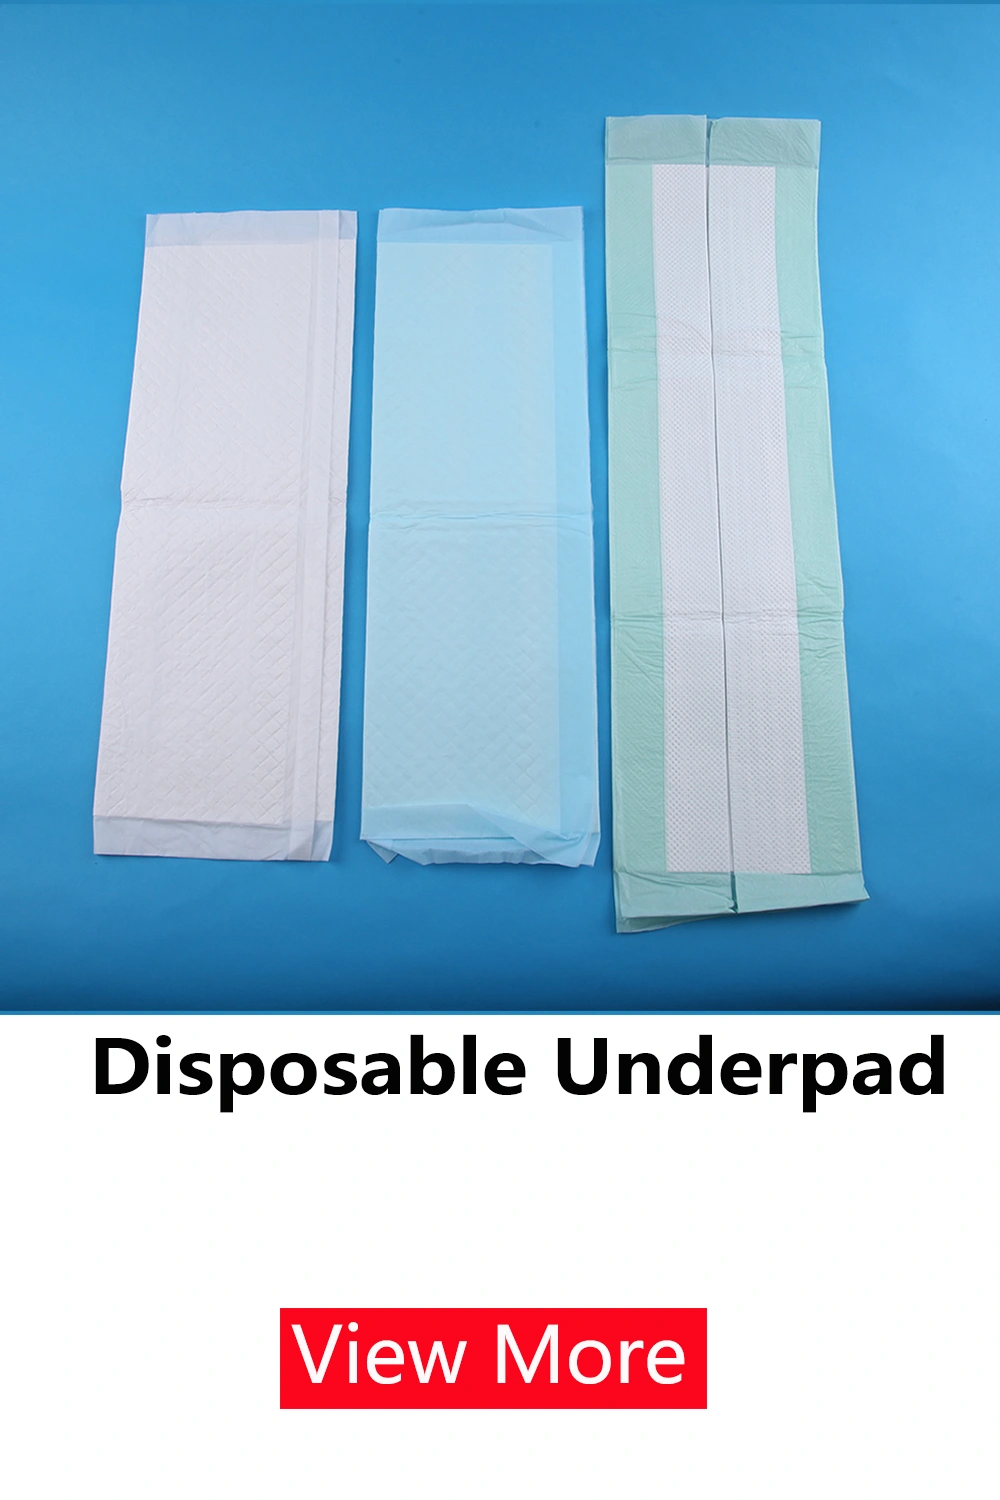 adult diaper and disposable underpad picture